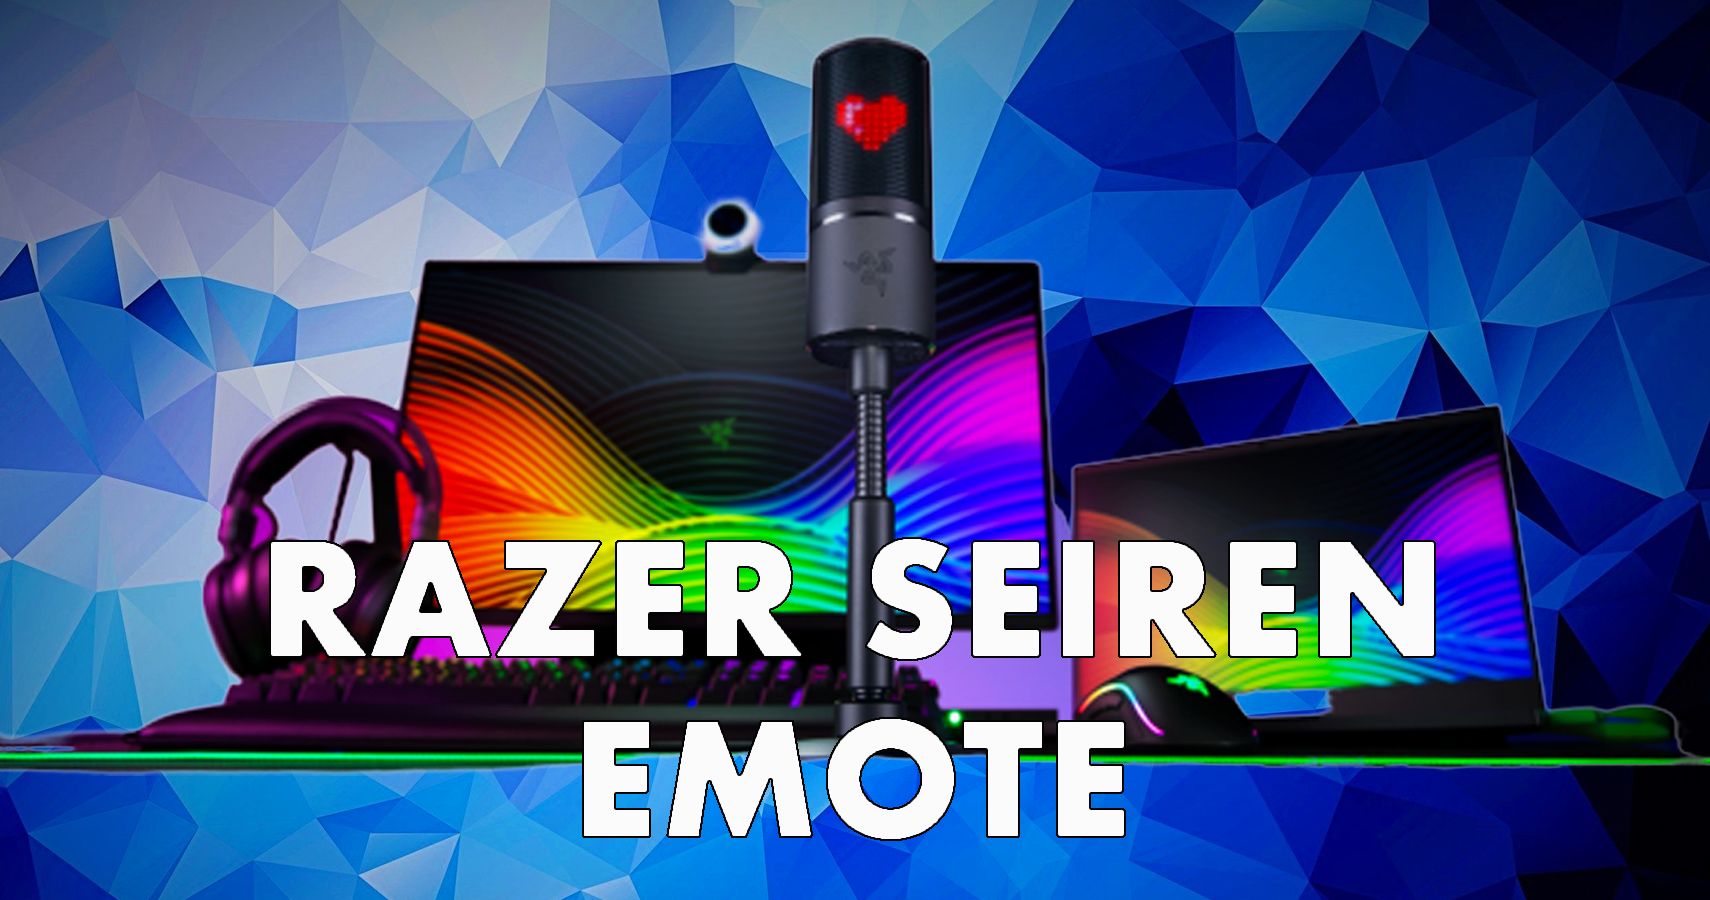 Razer Seiren Emote Review An Awesome Microphone For Streamers And Their Audience